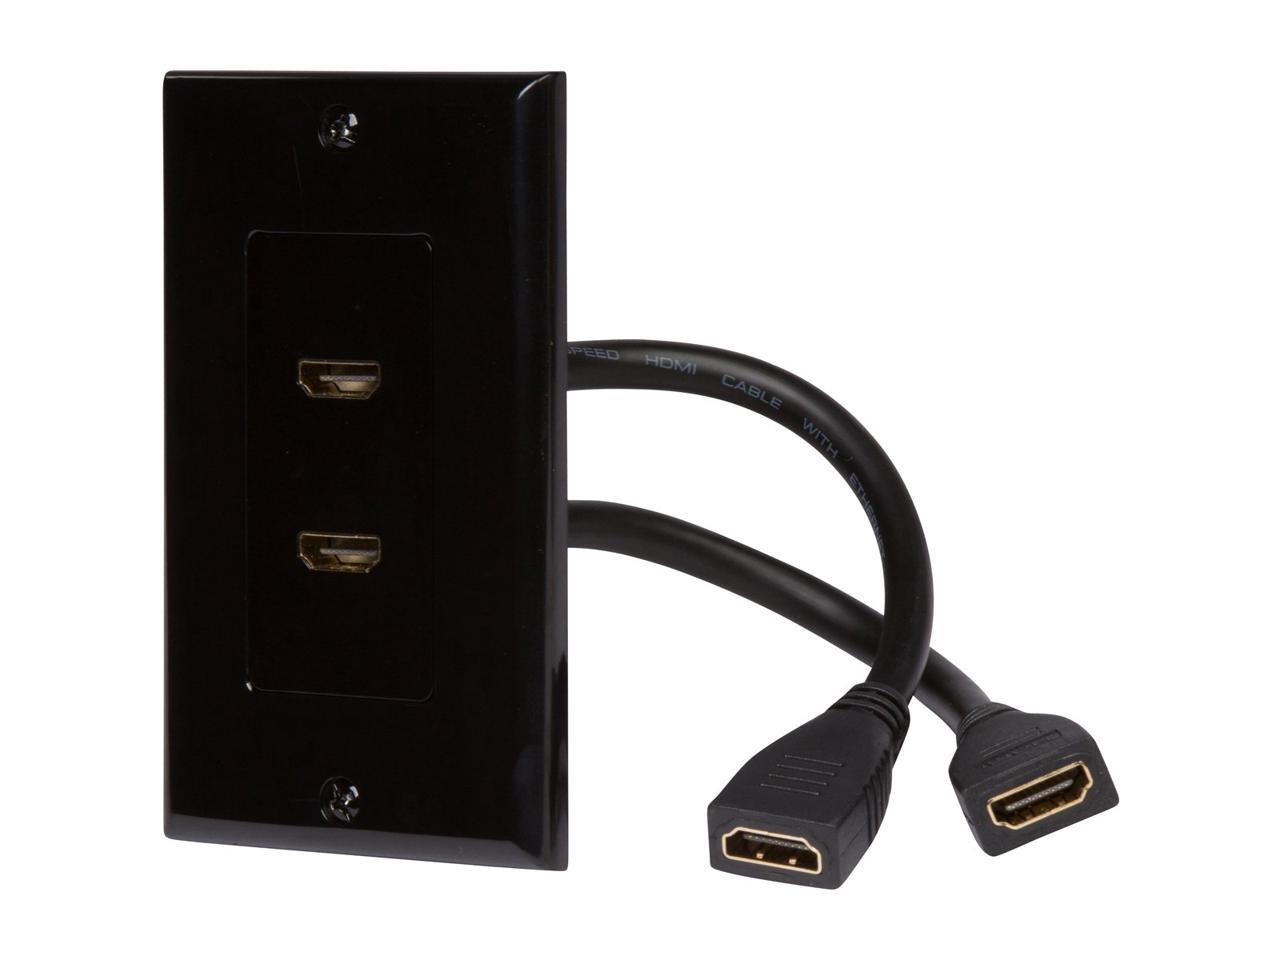 Buyer's Point HDMI Wall Plate[UL Listed] 2 Port Insert with 6-Inch Built-in Flexible Hi-Speed HDMI Cable with Ethernet Decora Style 2-Piece Pigtail Jack/Plug for Dual Outlet Port Pack of 1 Black Kit - image 4 of 6